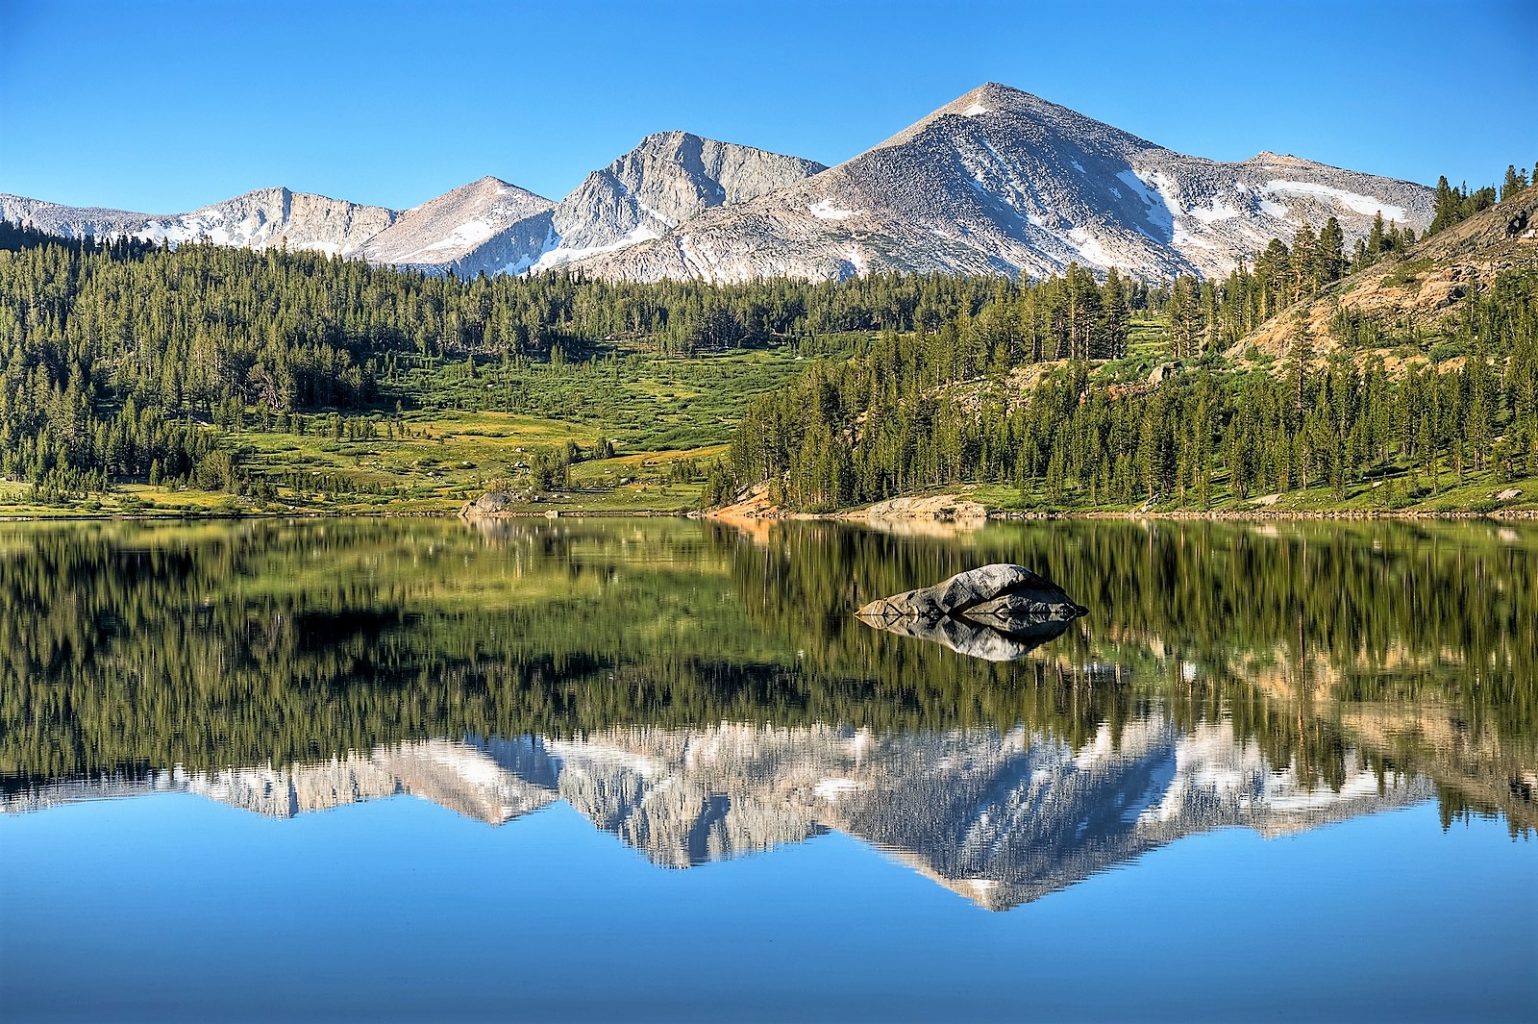 mountains reflected in a lake with trees and rocks